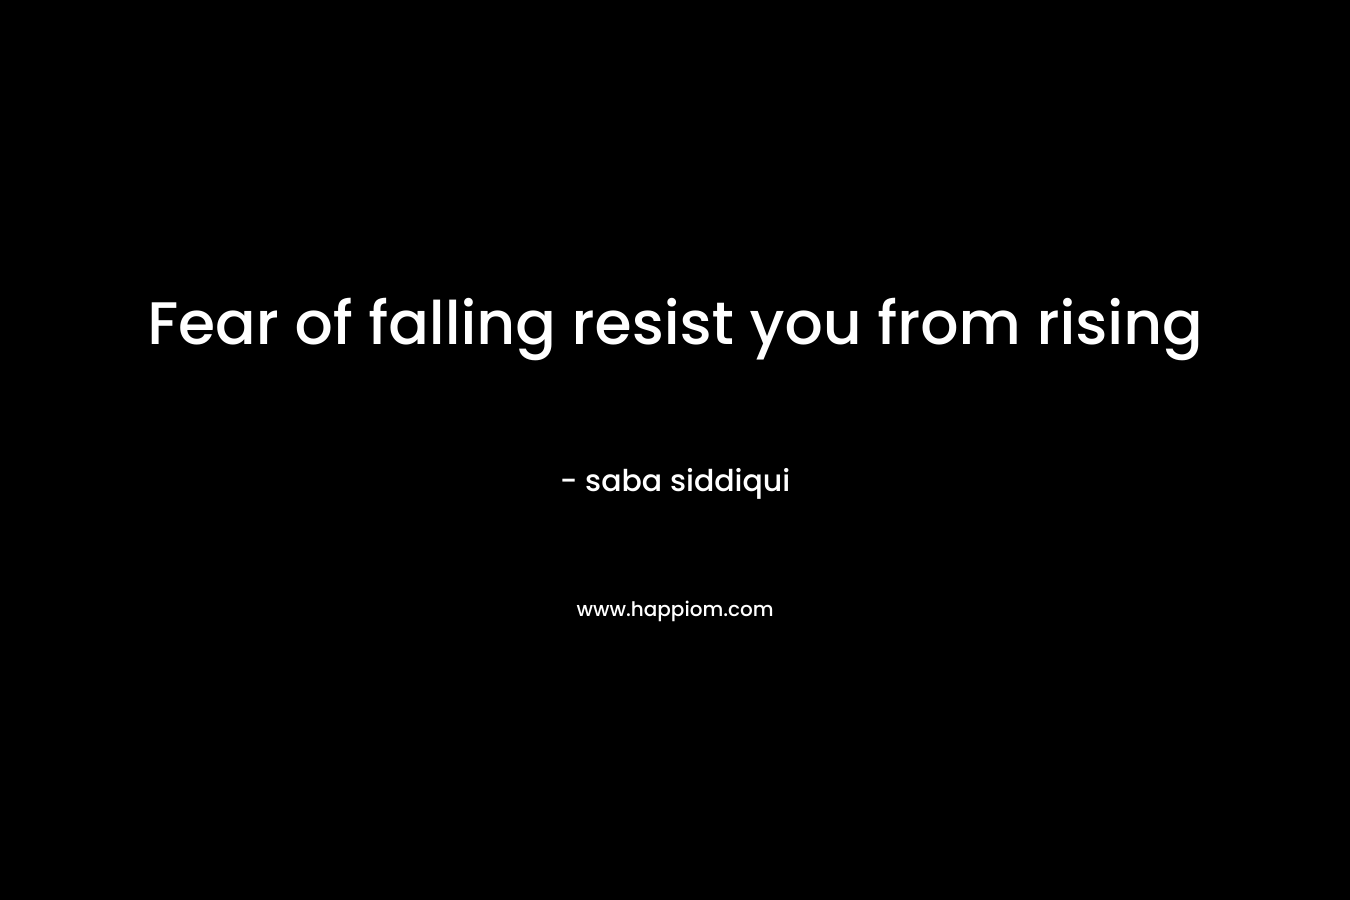 Fear of falling resist you from rising